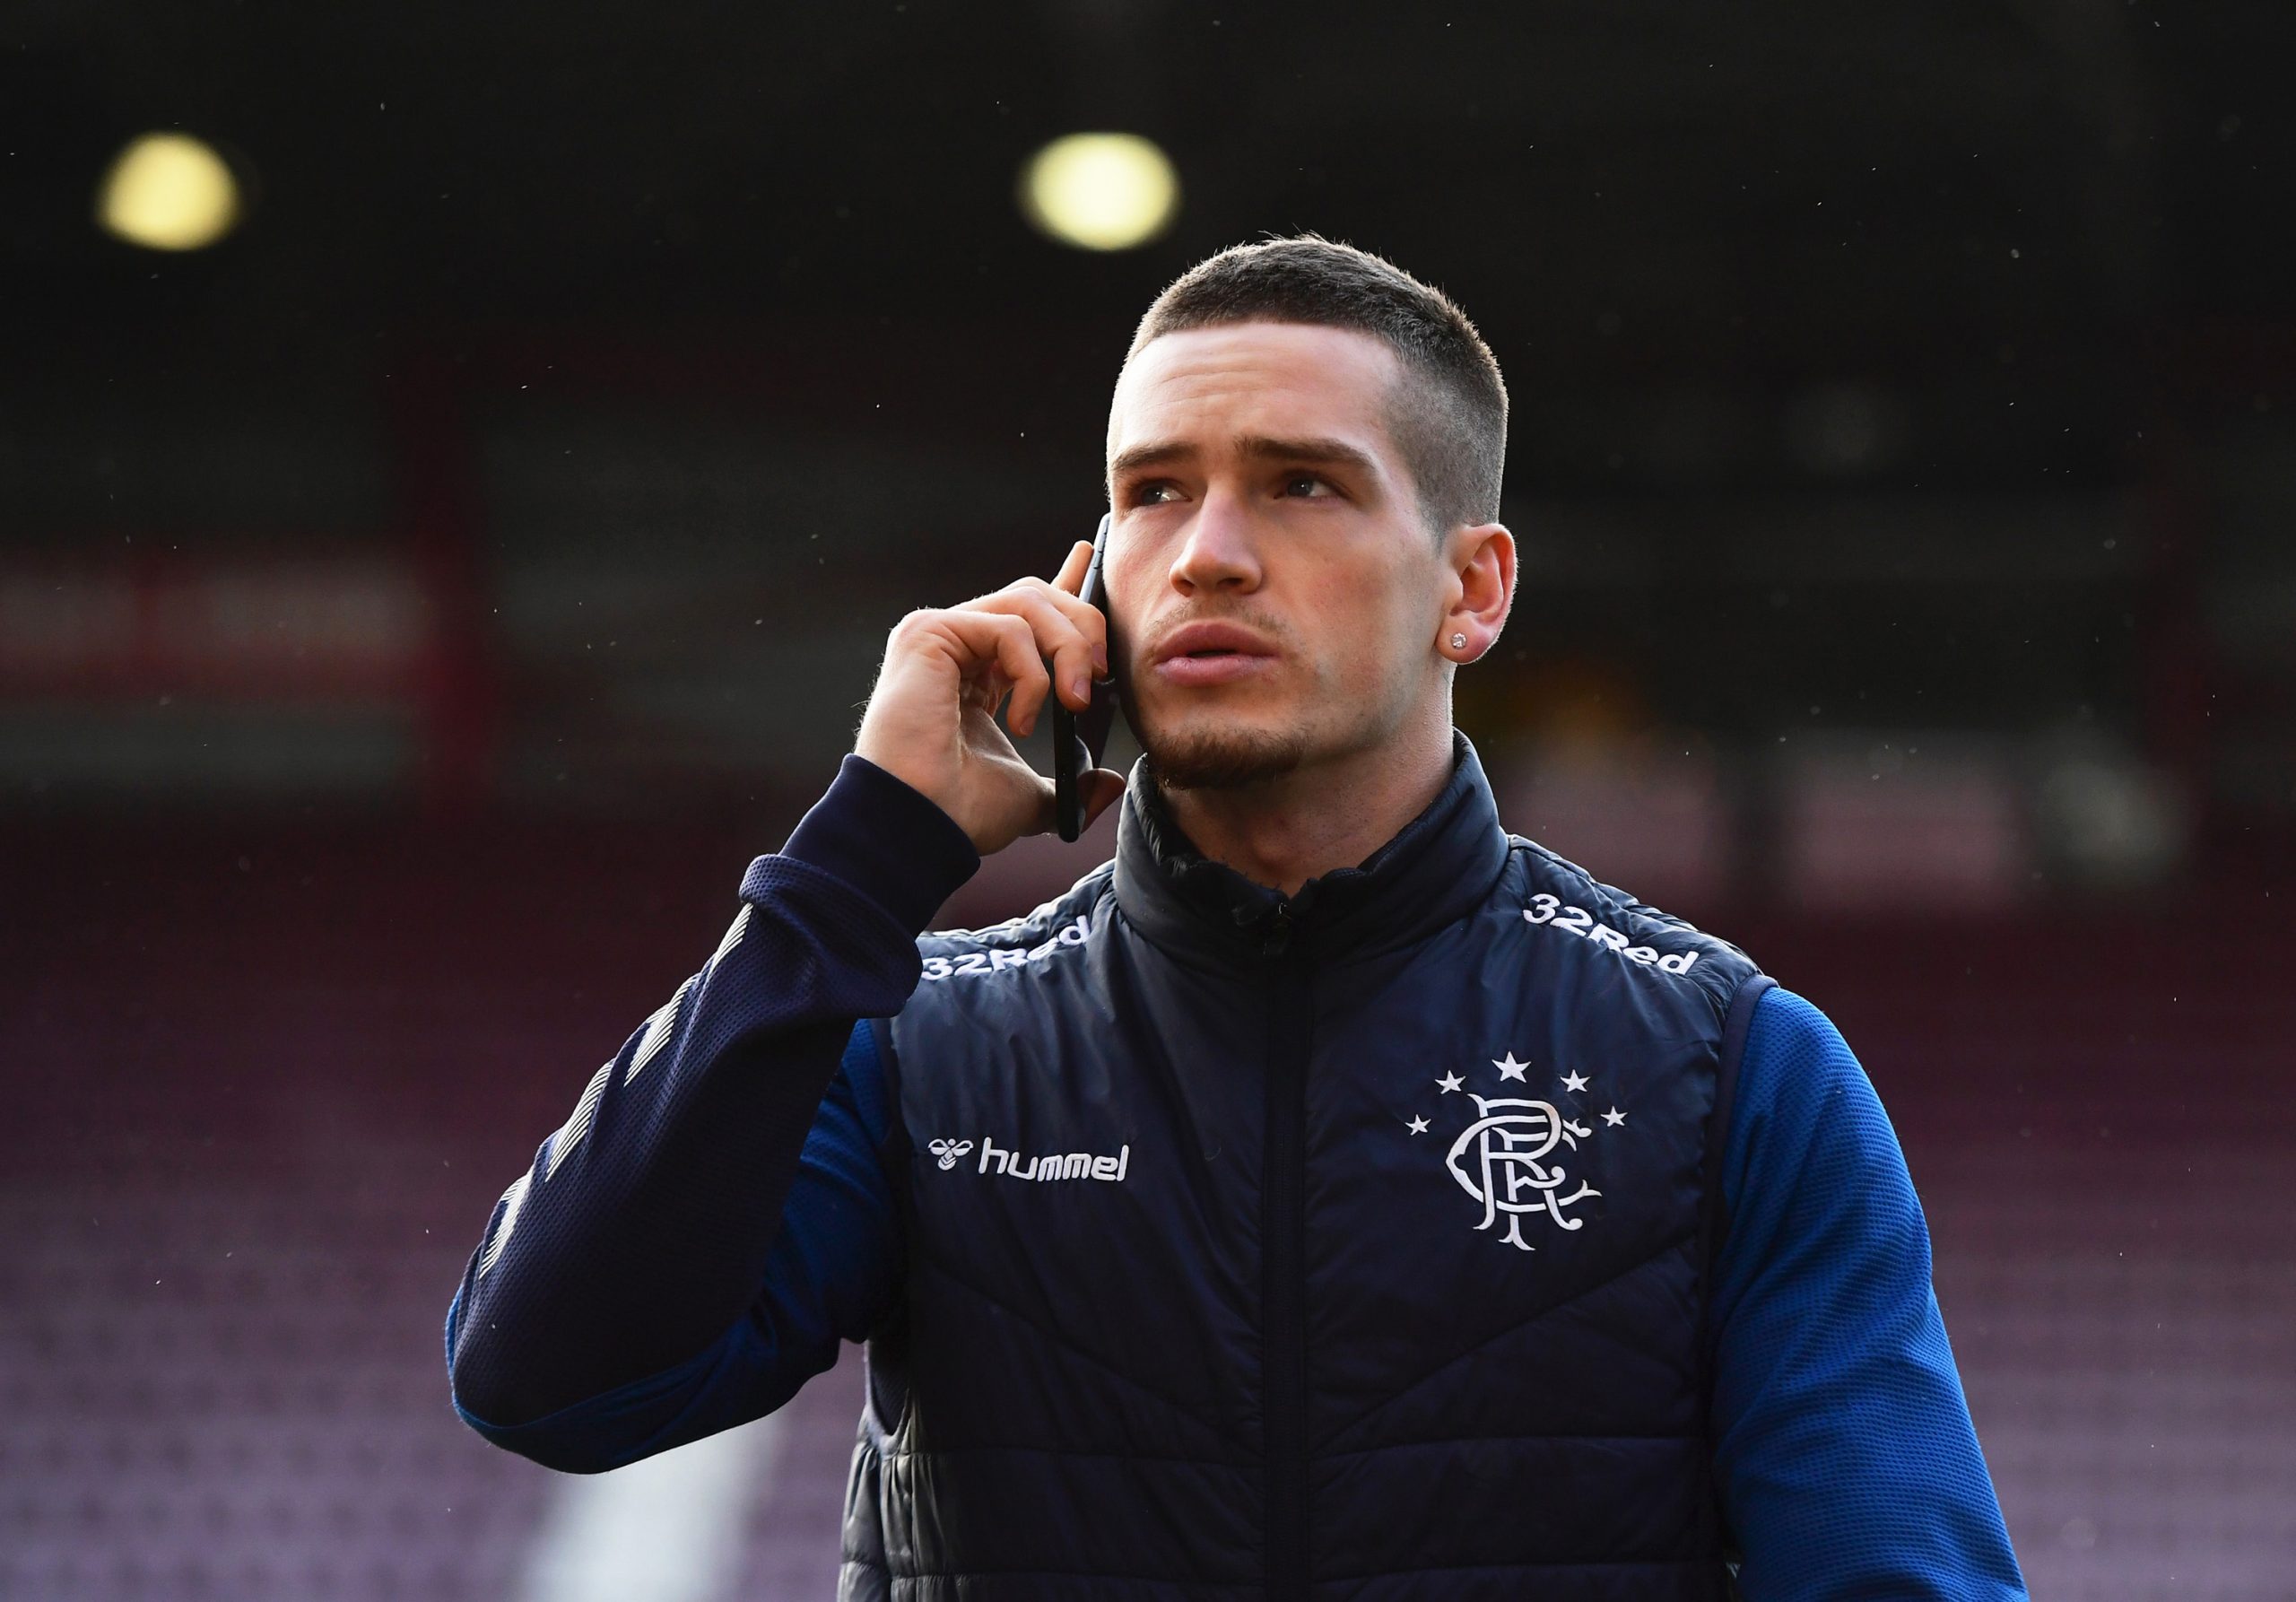 EDINBURGH, SCOTLAND - FEBRUARY 29: Ryan Kent of Rangers looks on during the Scottish Cup Quarter Final match between Hearts and Rangers at Tynecastle Park on February 29, 2020 in Edinburgh, Scotland.